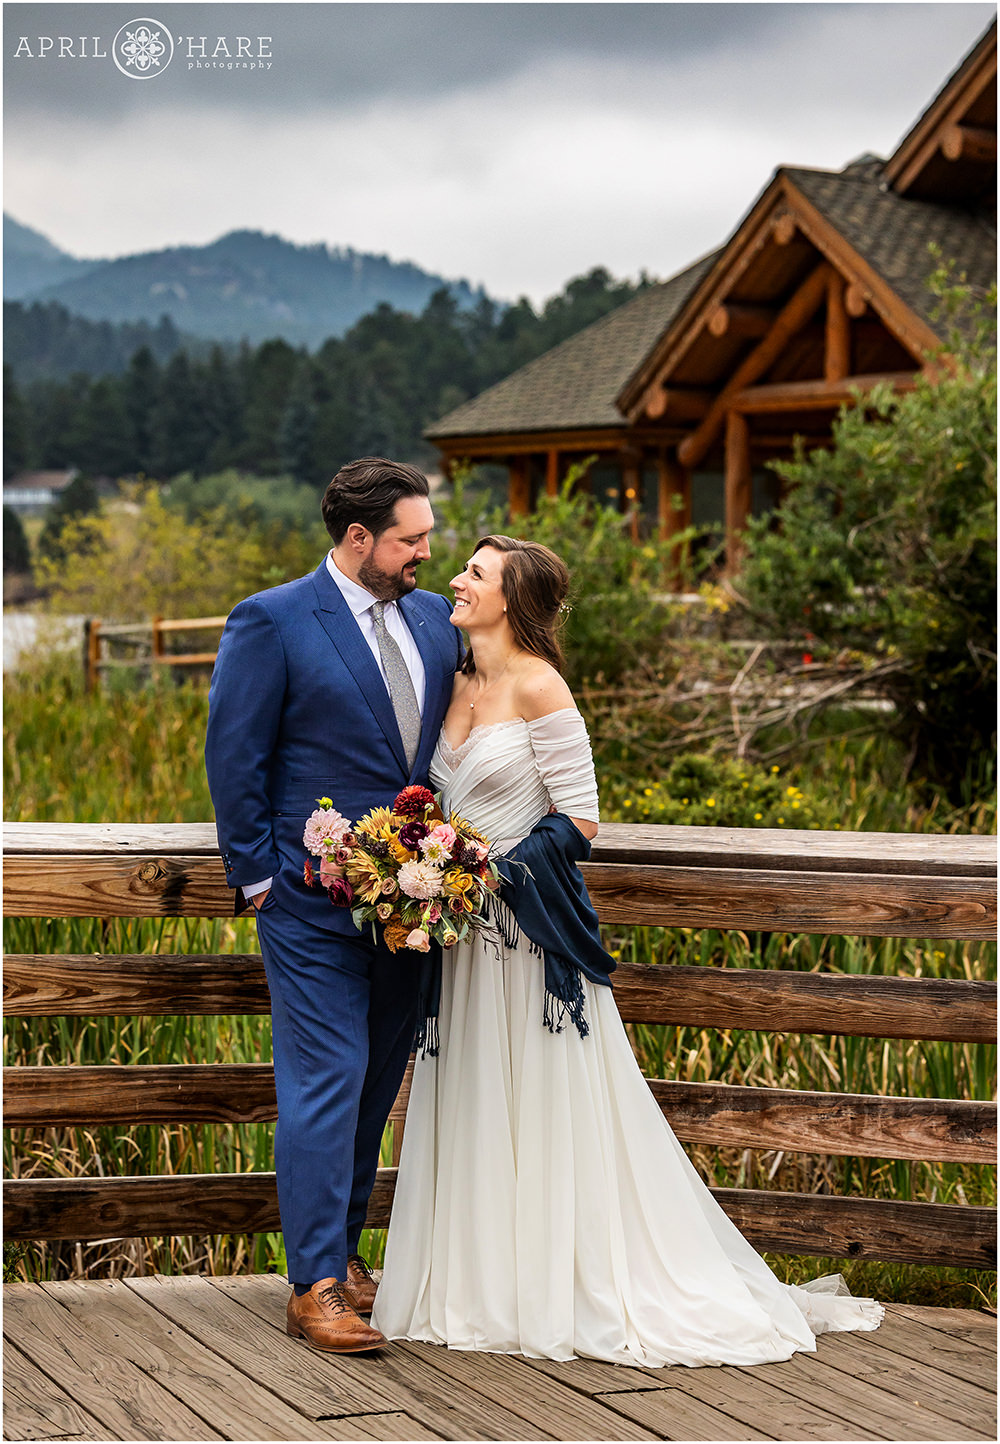 Gorgeous Wedding portrait on the wooden boardwalk with Evergreen Lake House in the backdrop on a stormy fall wedding day